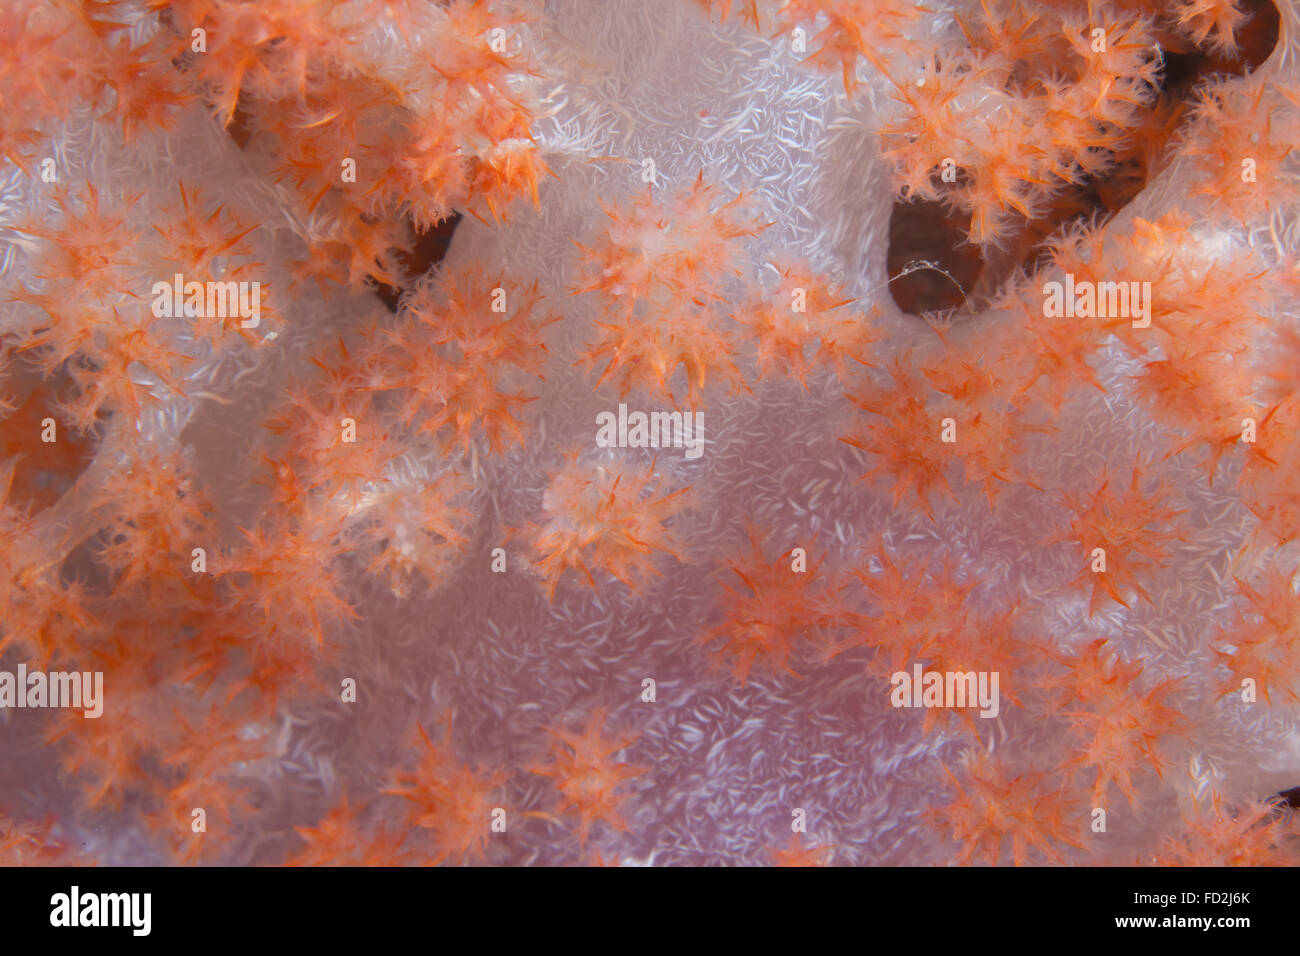 Orange tree coral (Dendronephthya) on a Fijian reef. Stock Photo